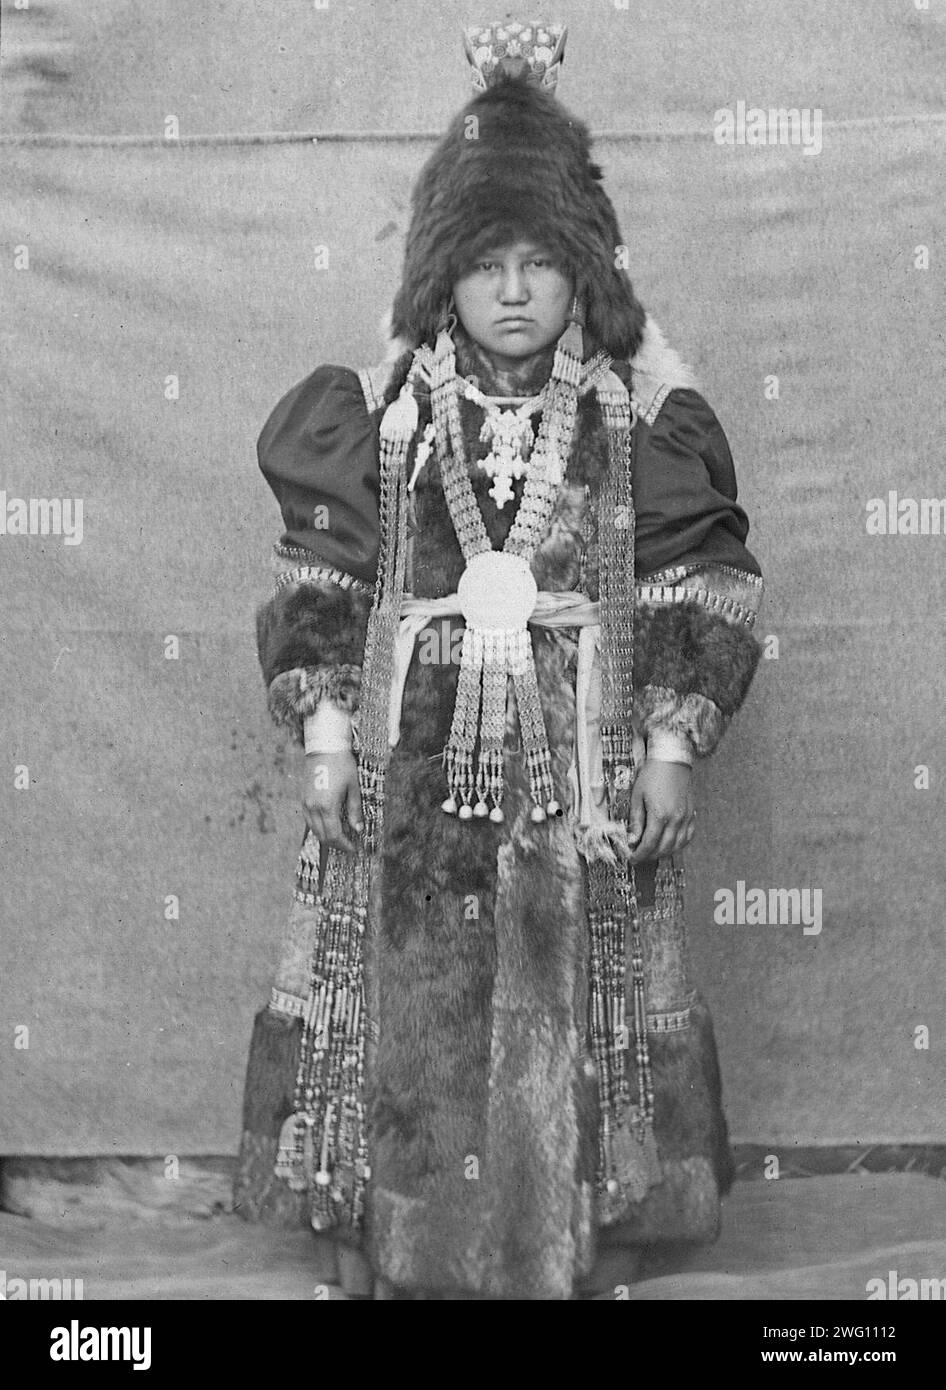 Yakut woman in festive attire, 1890. The album &quot;Views of the Yakutsk Region&quot; contains 151 photographs. Subjects include the Lena River shore; various forms of river transport--including boats, rafts, trade barges, and steamships; post offices along the Lena highway, and transport by horse and reindeer. Several of the photographs are signed with the initials &quot;I. P.&quot; Irkutsk State University Stock Photo